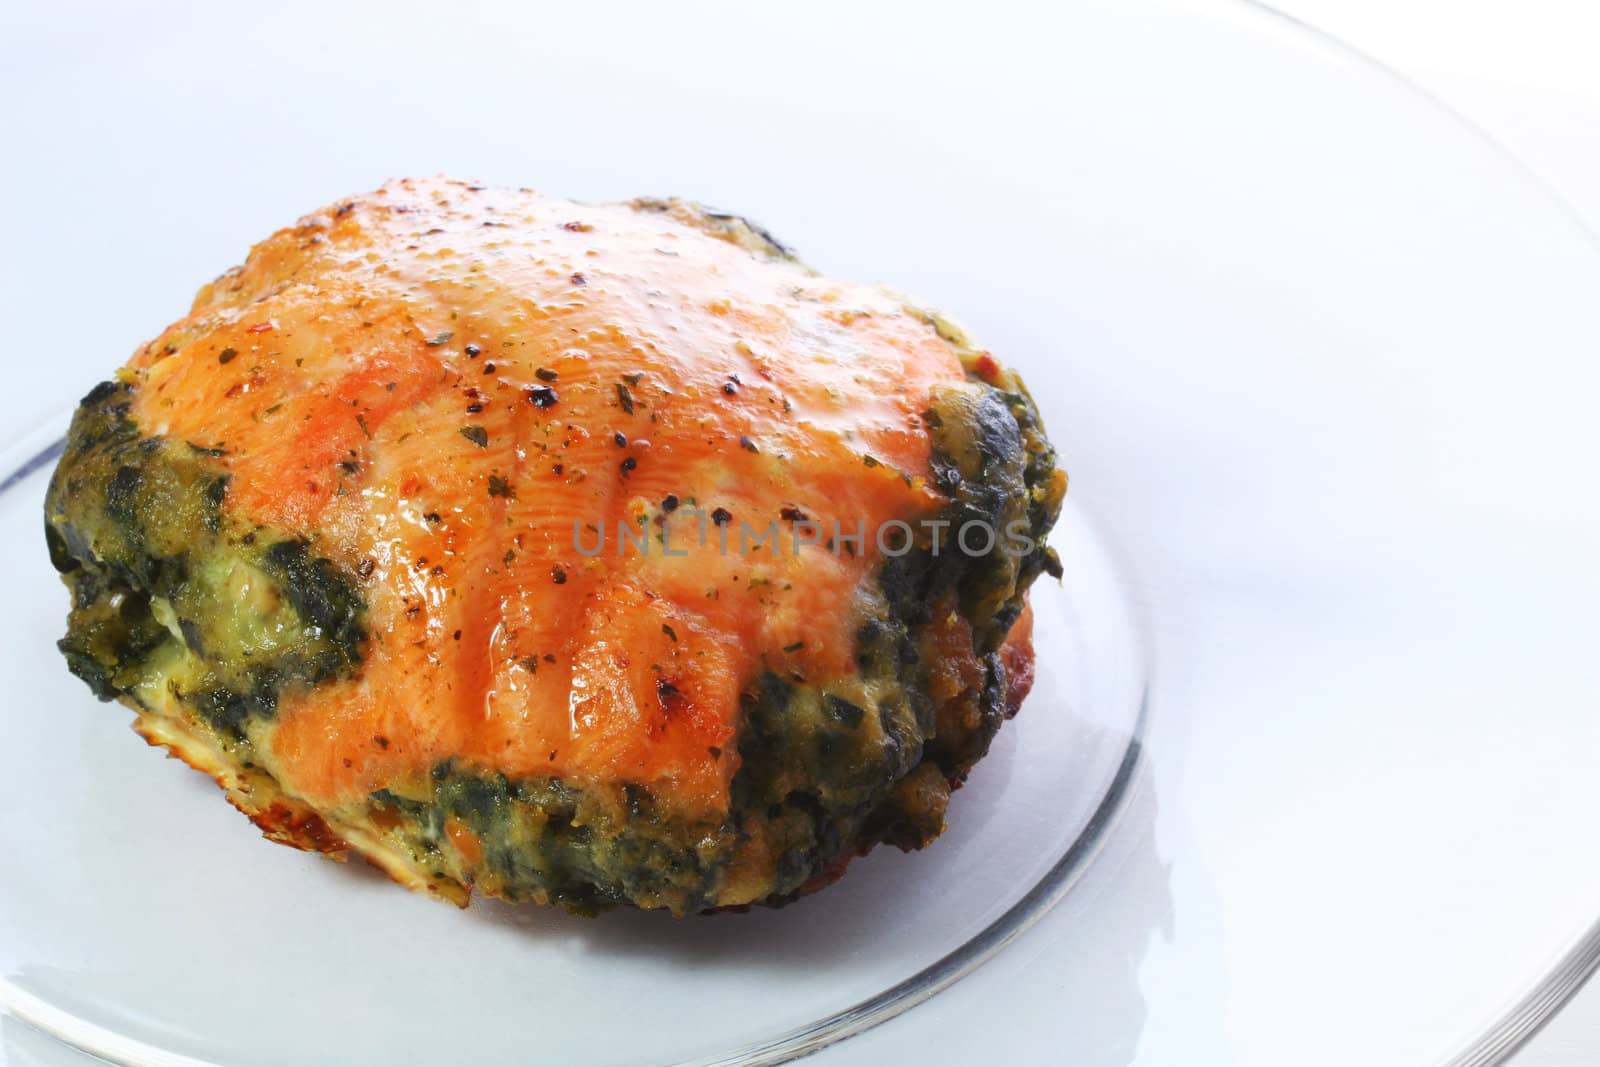 Baked salmon stuffed with spinach.